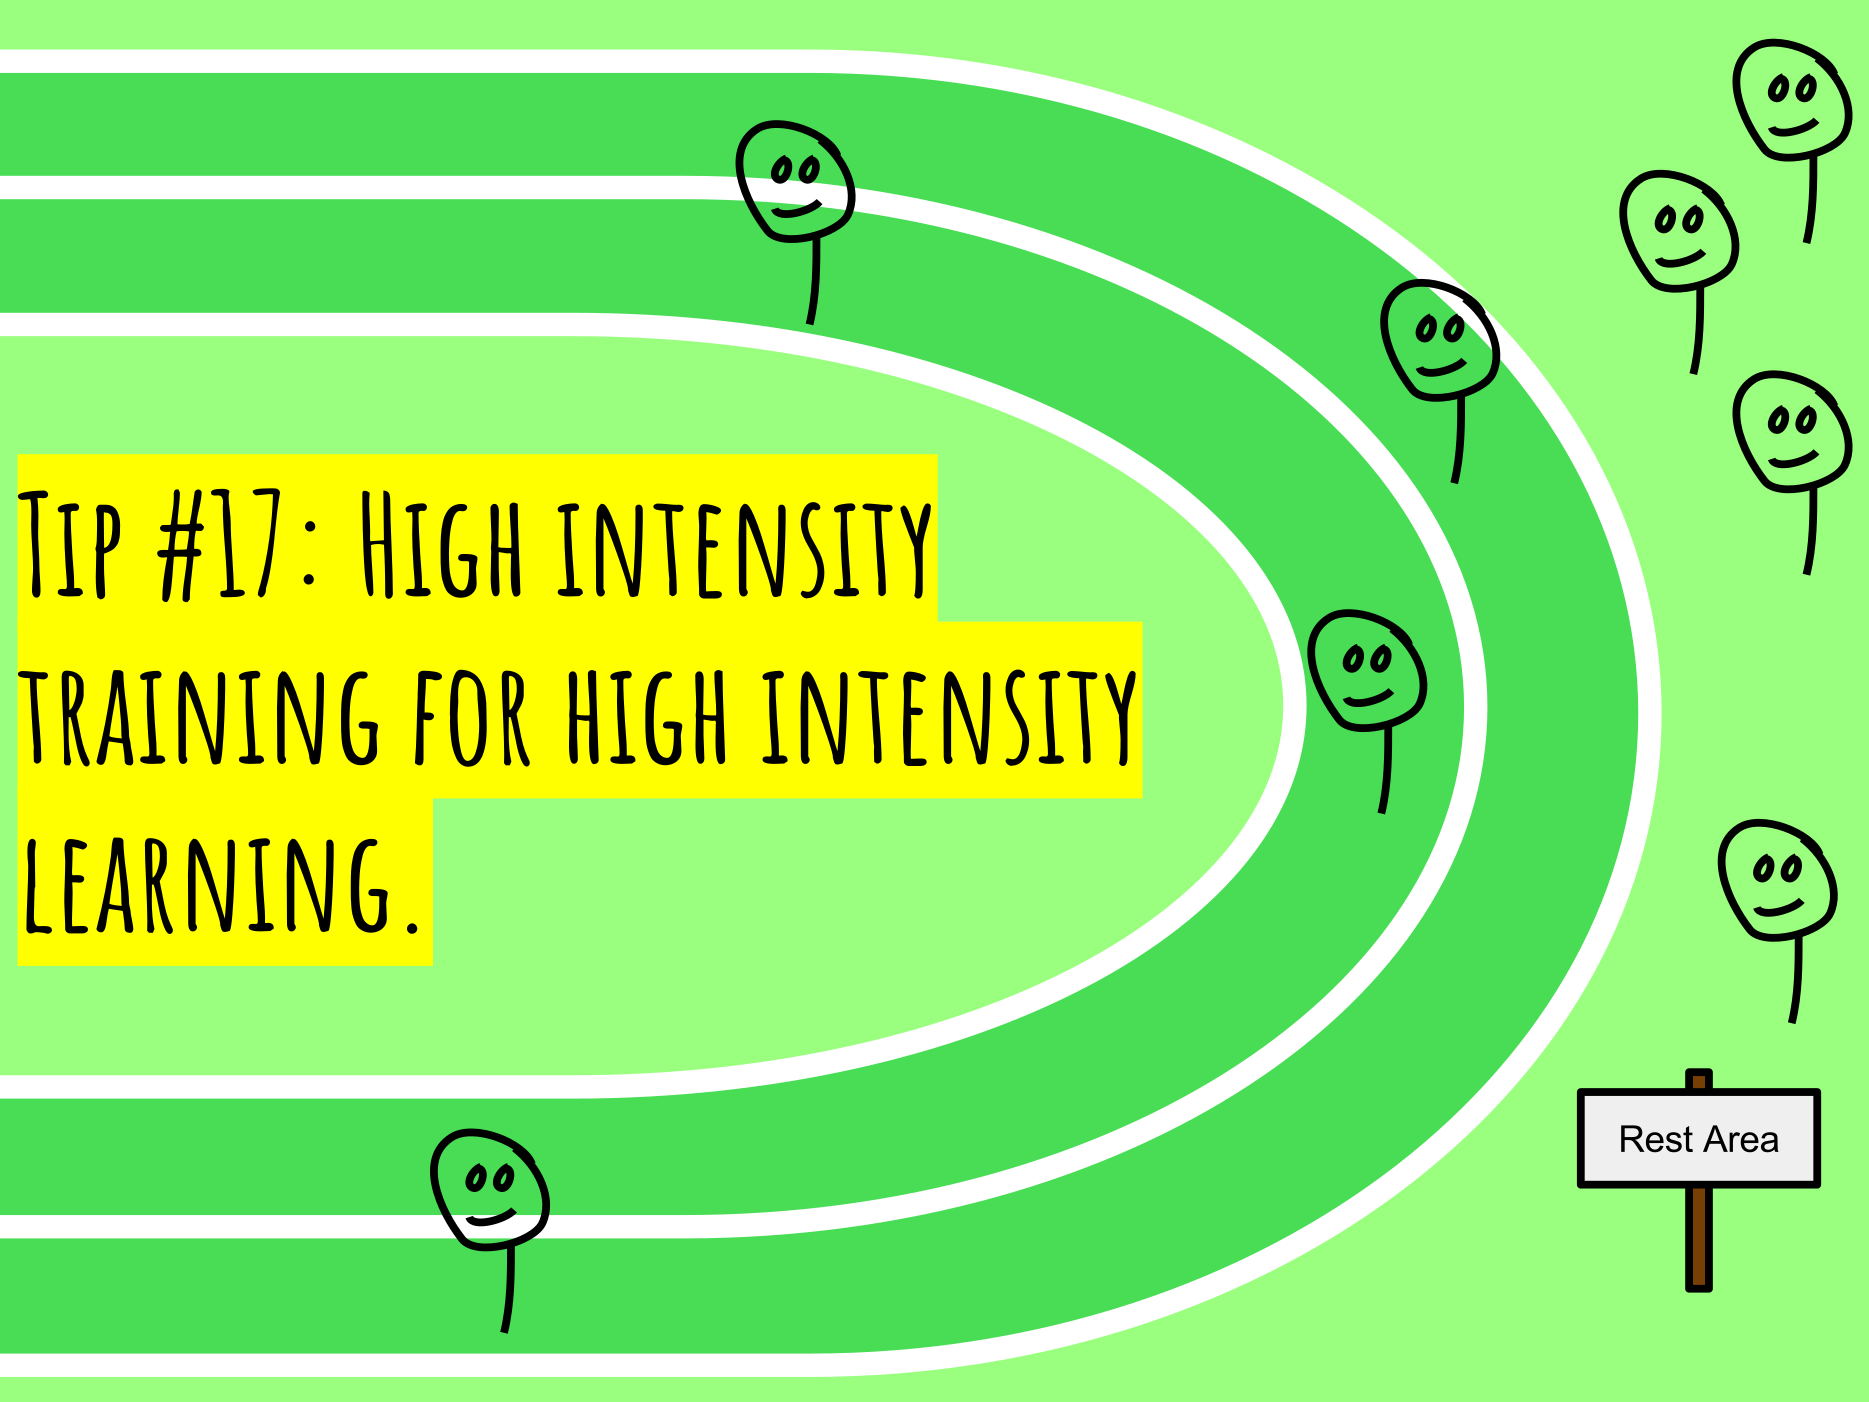 CC - Tip #17- High intensity training for high intensity learning